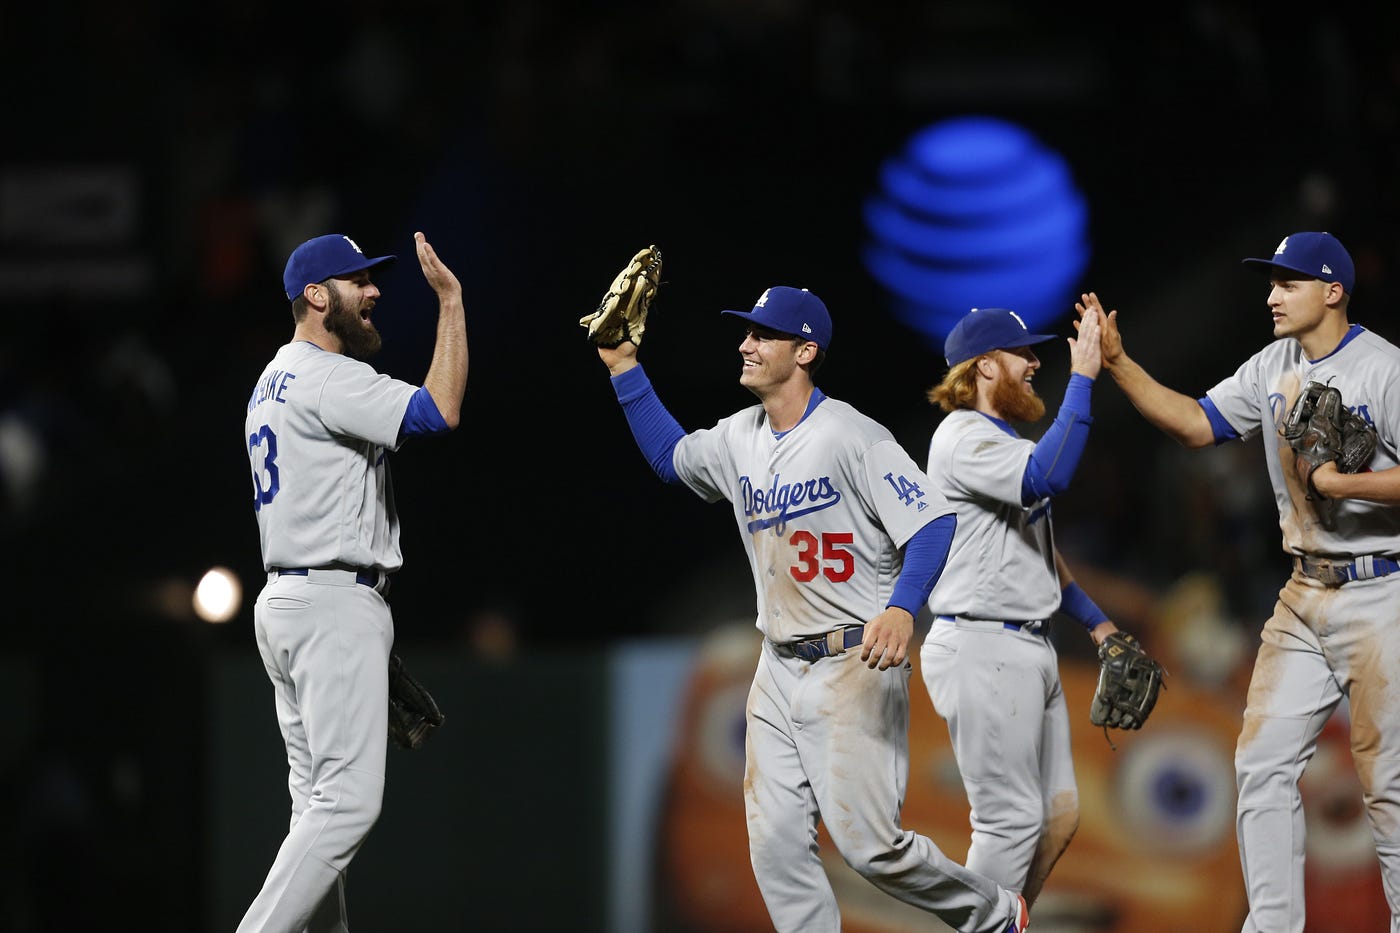 Welcome to the bigs: The story of Cody Bellinger's MLB debut, by Cary  Osborne